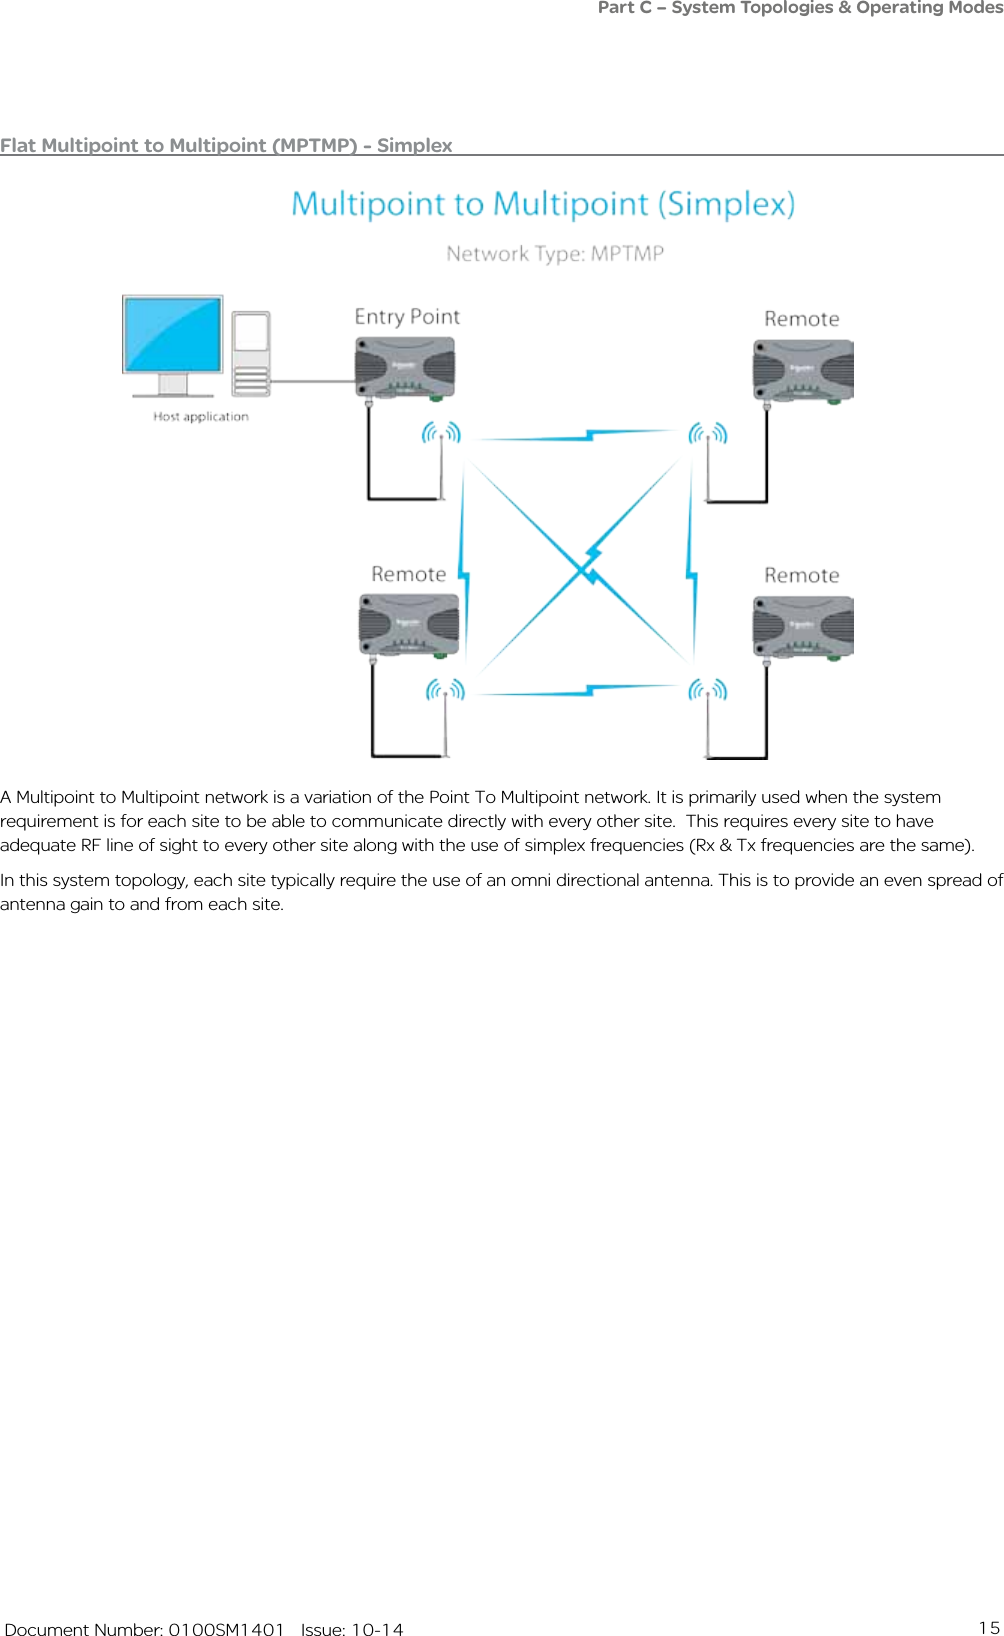 15   Document Number: 0100SM1401   Issue: 10-14Flat Multipoint to Multipoint (MPTMP) - SimplexA Multipoint to Multipoint network is a variation of the Point To Multipoint network. It is primarily used when the system requirement is for each site to be able to communicate directly with every other site.  This requires every site to have adequate RF line of sight to every other site along with the use of simplex frequencies (Rx &amp; Tx frequencies are the same).In this system topology, each site typically require the use of an omni directional antenna. This is to provide an even spread of antenna gain to and from each site. Part C – System Topologies &amp; Operating Modes